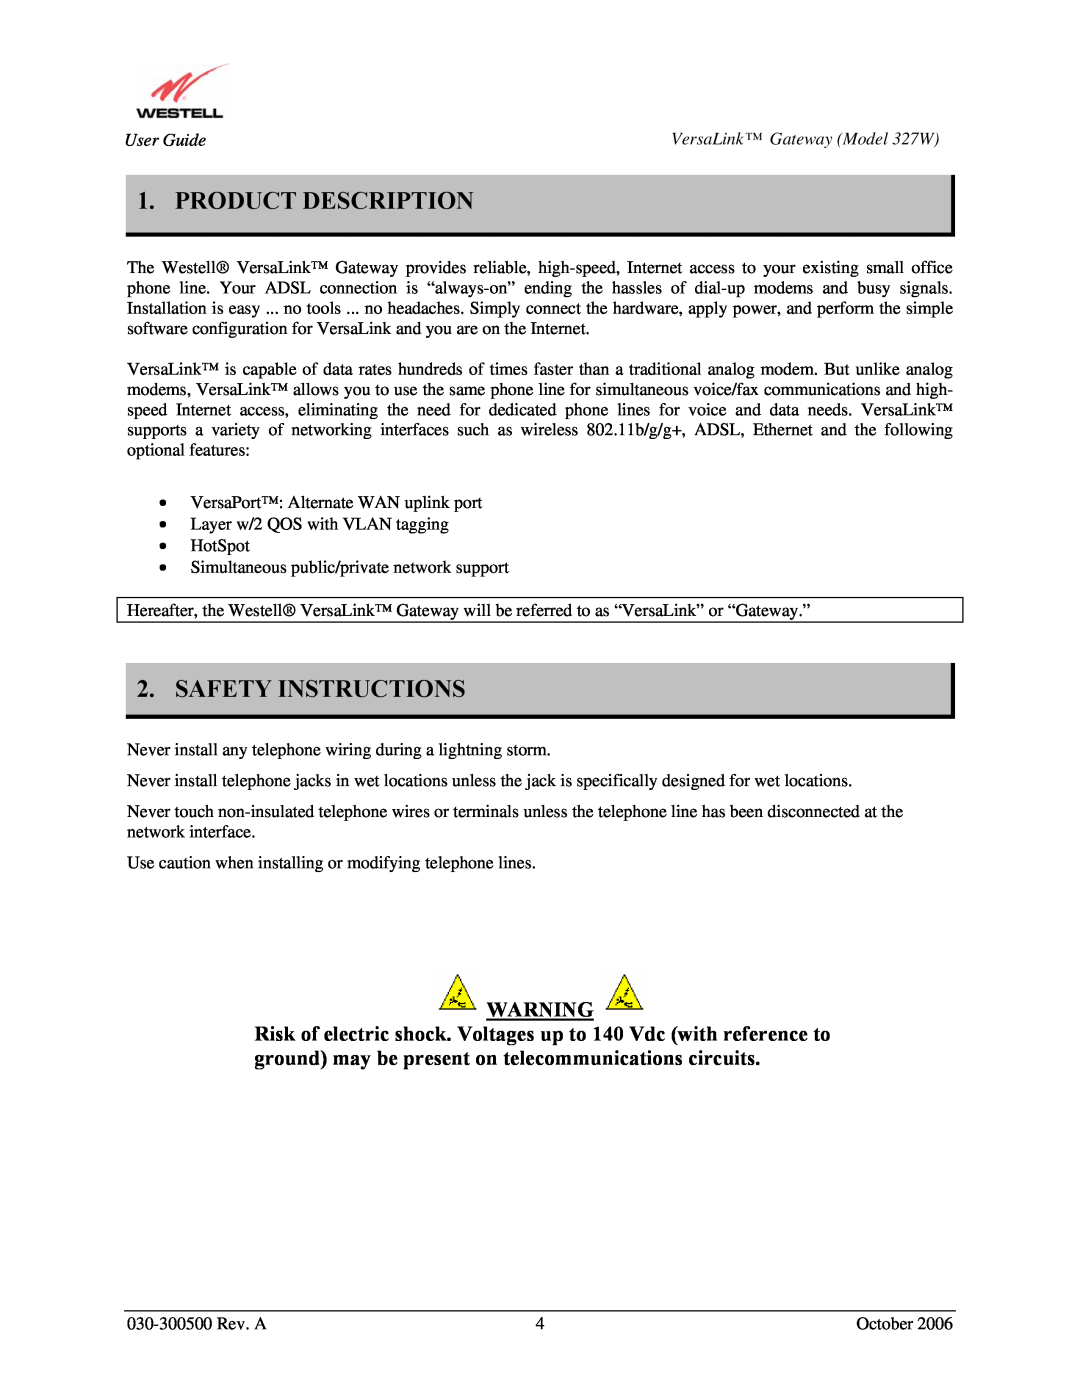 Westell Technologies 327W manual Product Description, Safety Instructions 